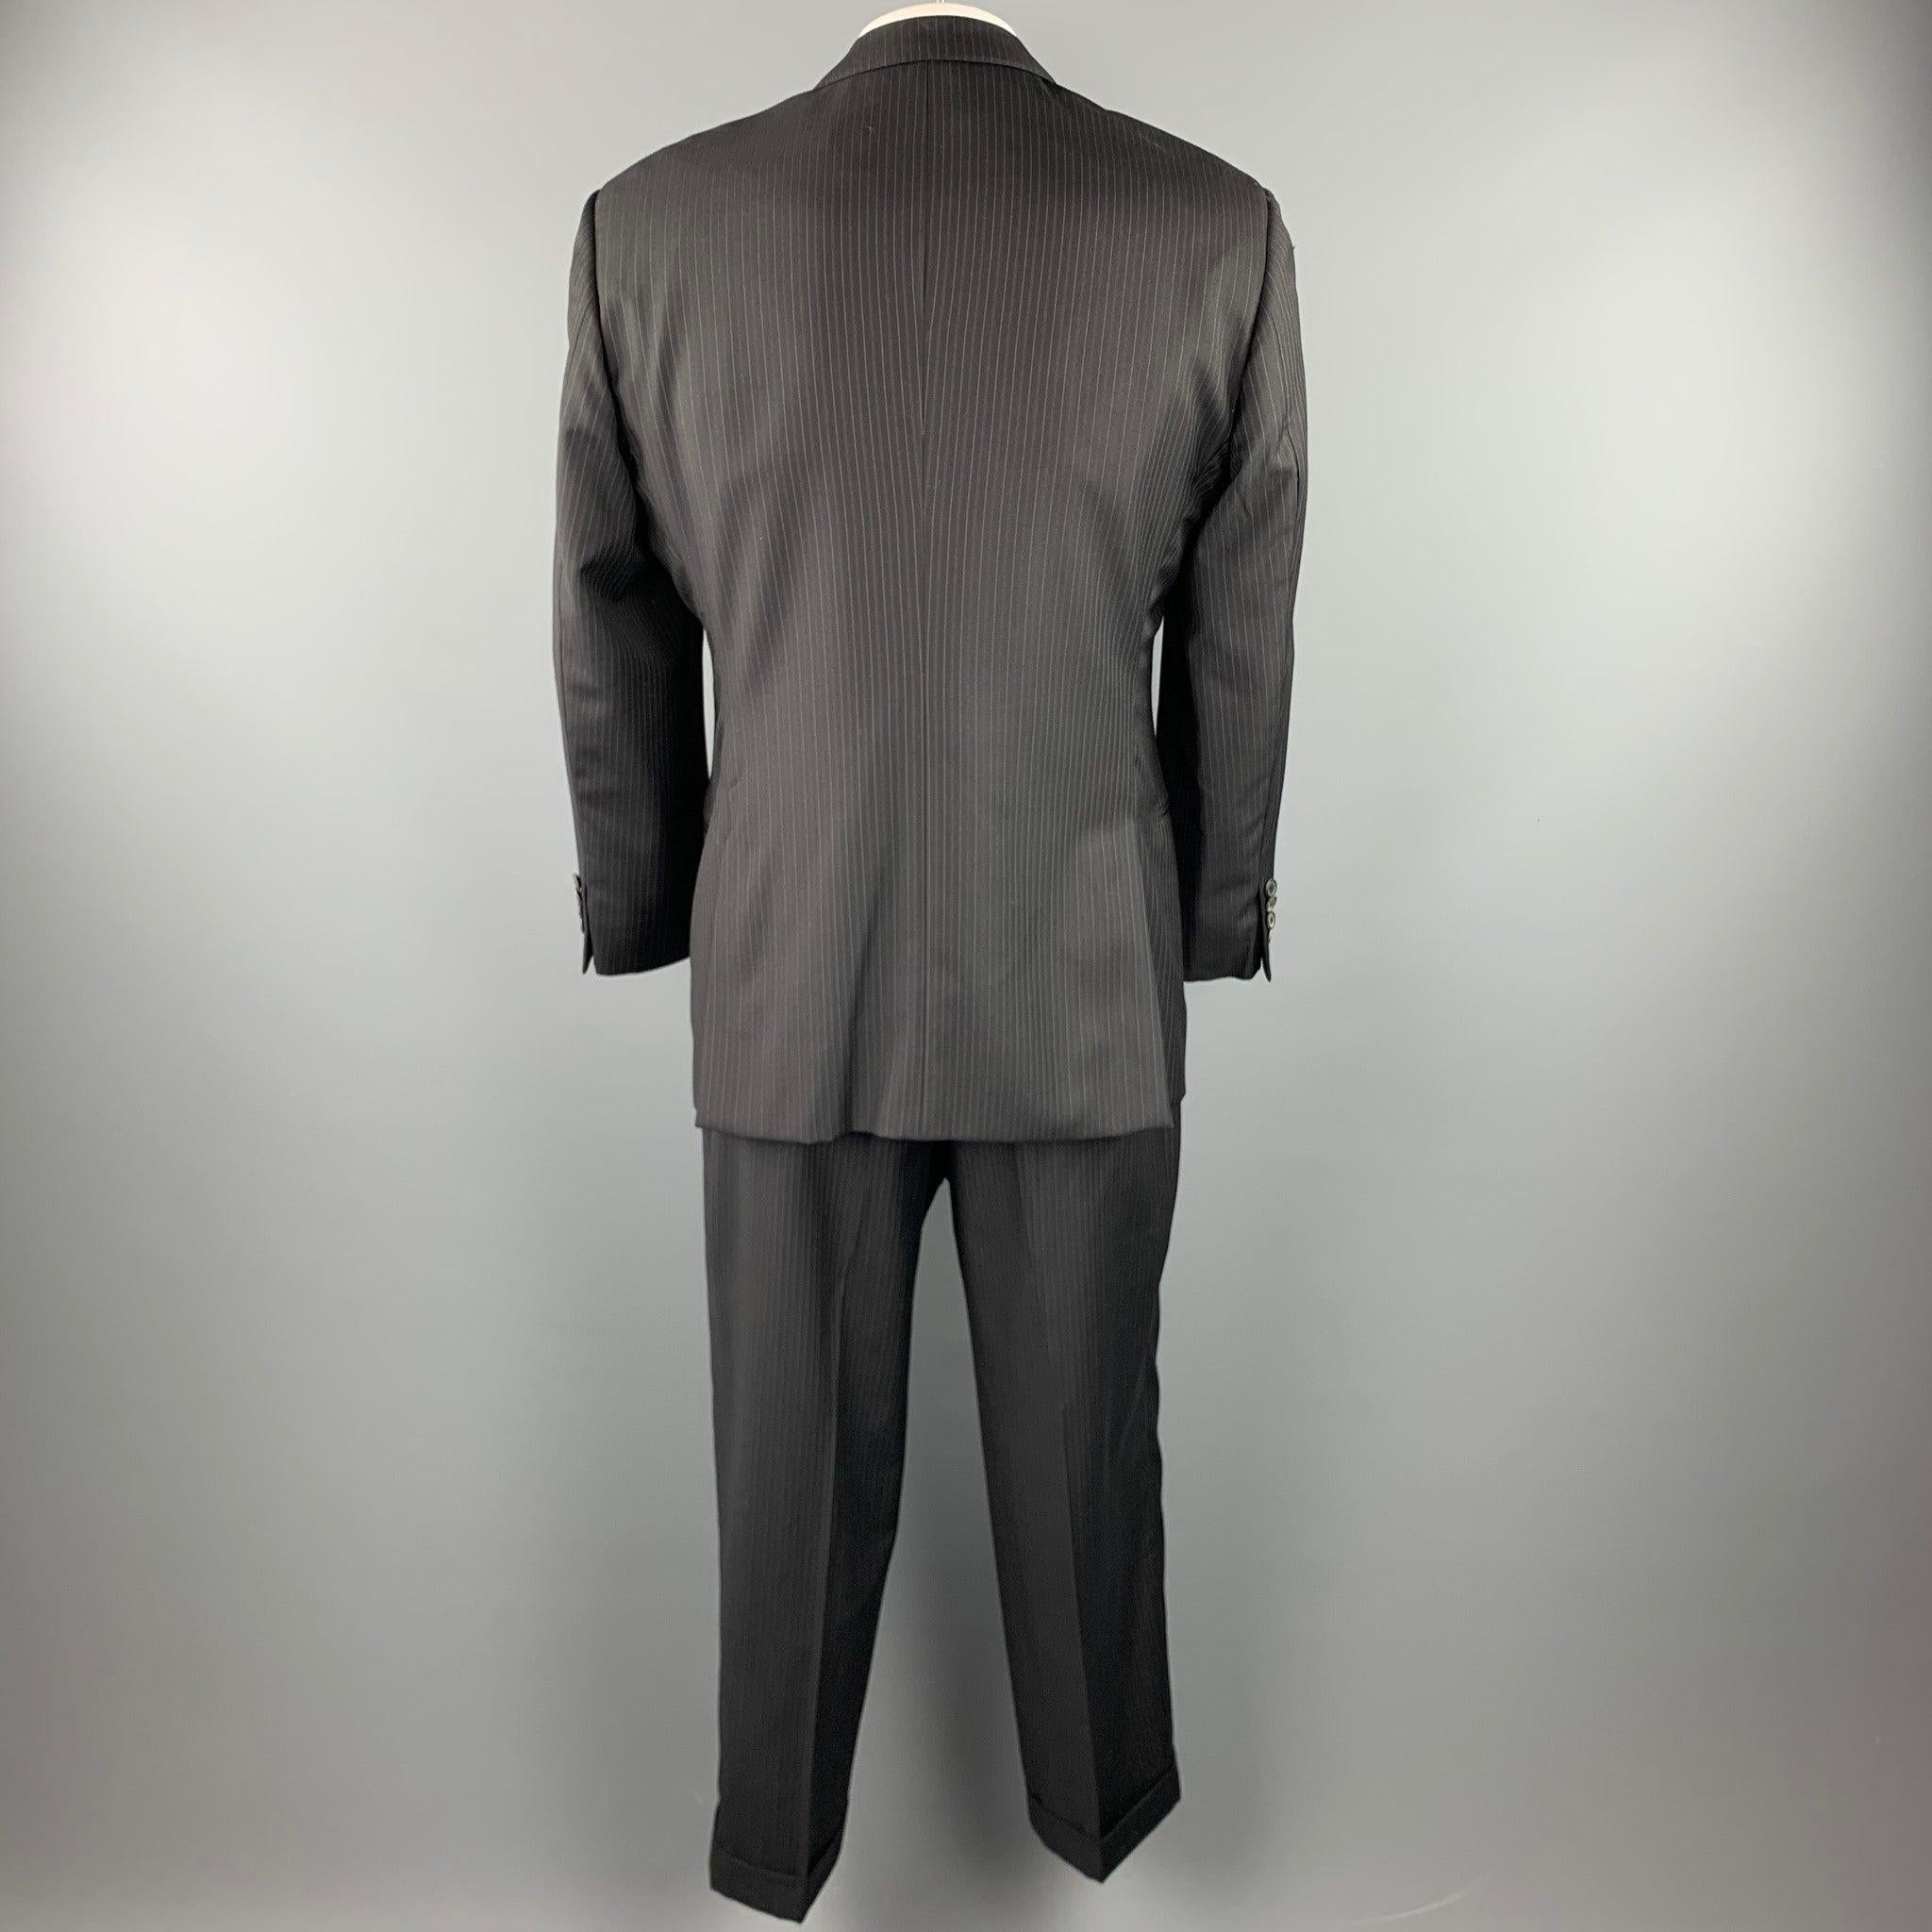 EMPORIO ARMANI Size 42 Regular Black Stripe Wool Notch Lapel Suit In Good Condition For Sale In San Francisco, CA